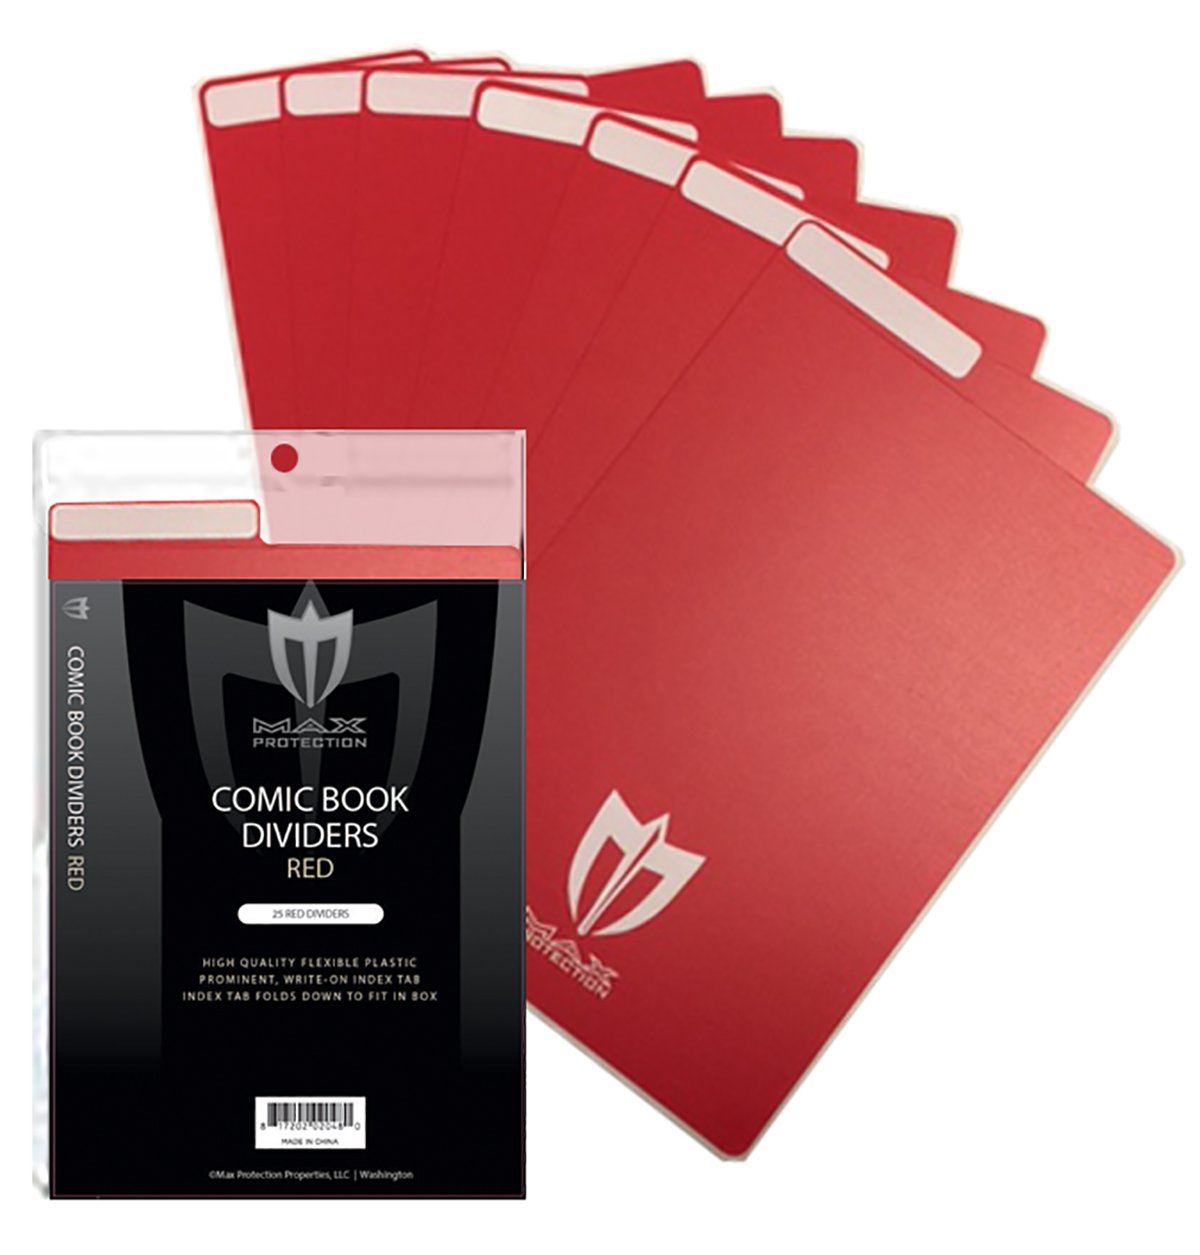 Max Pro Comic Book Dividers - Red - 300ct Case